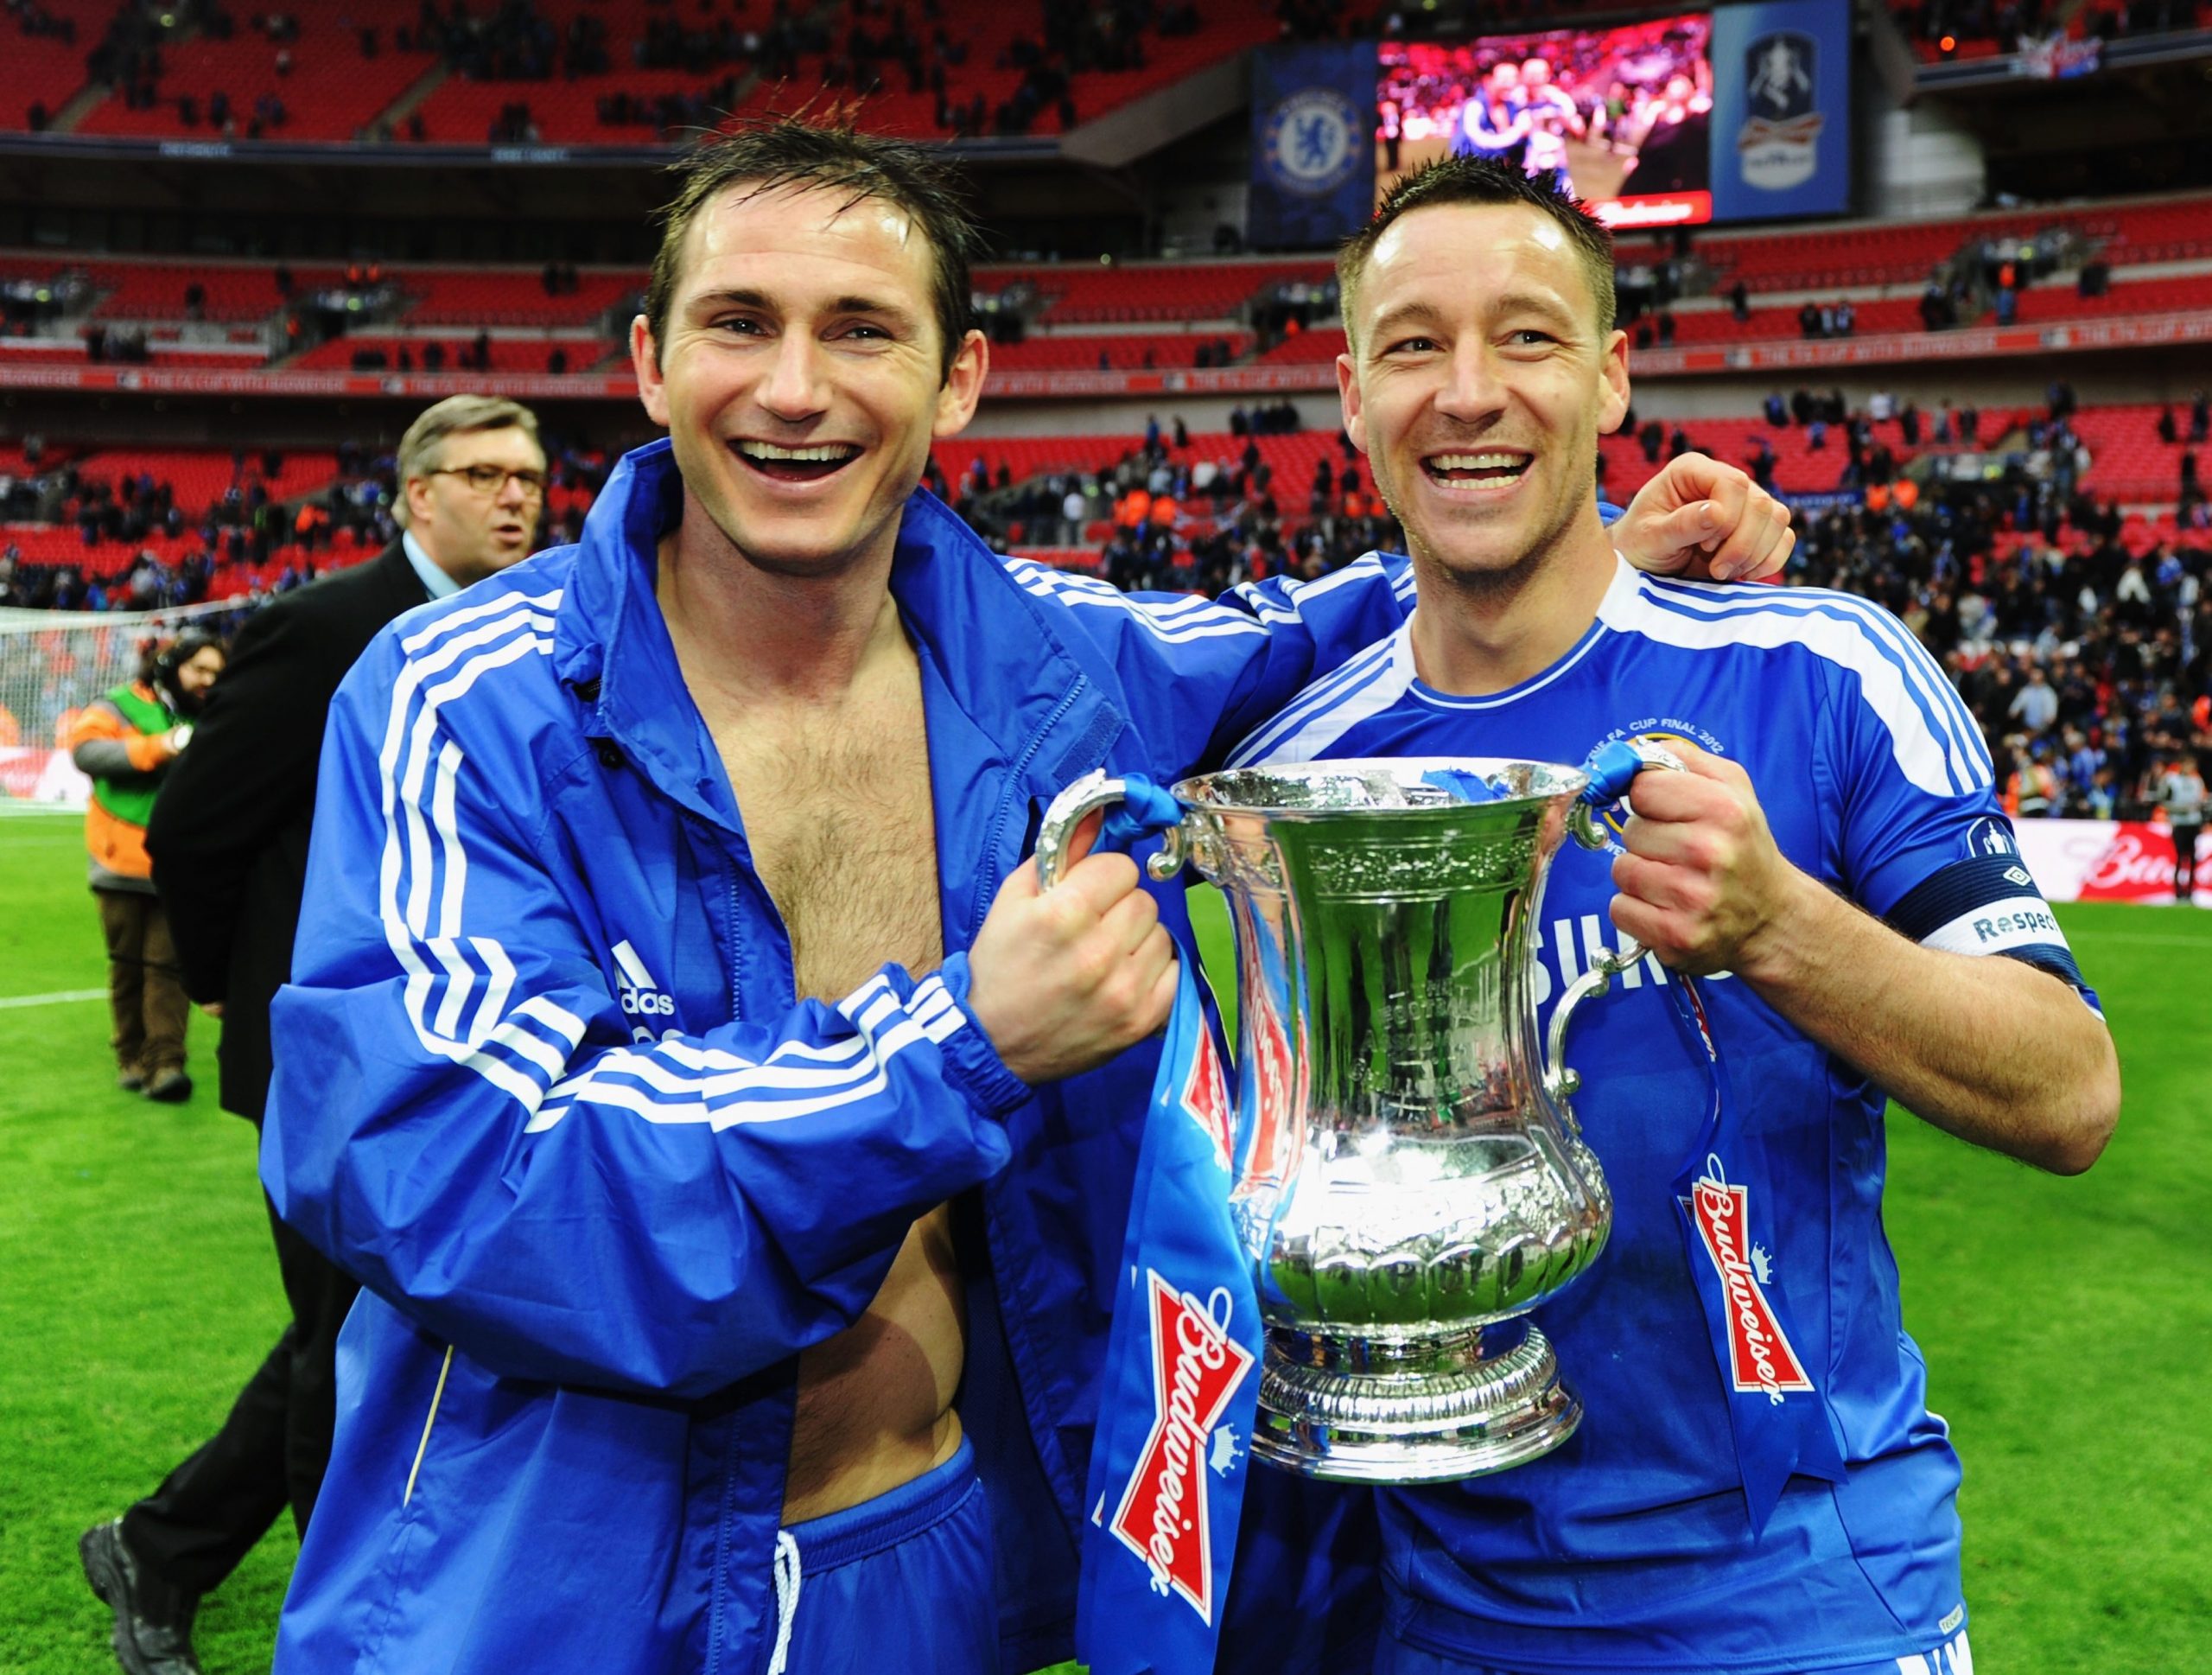 TLampard knows what it takes to win trophies